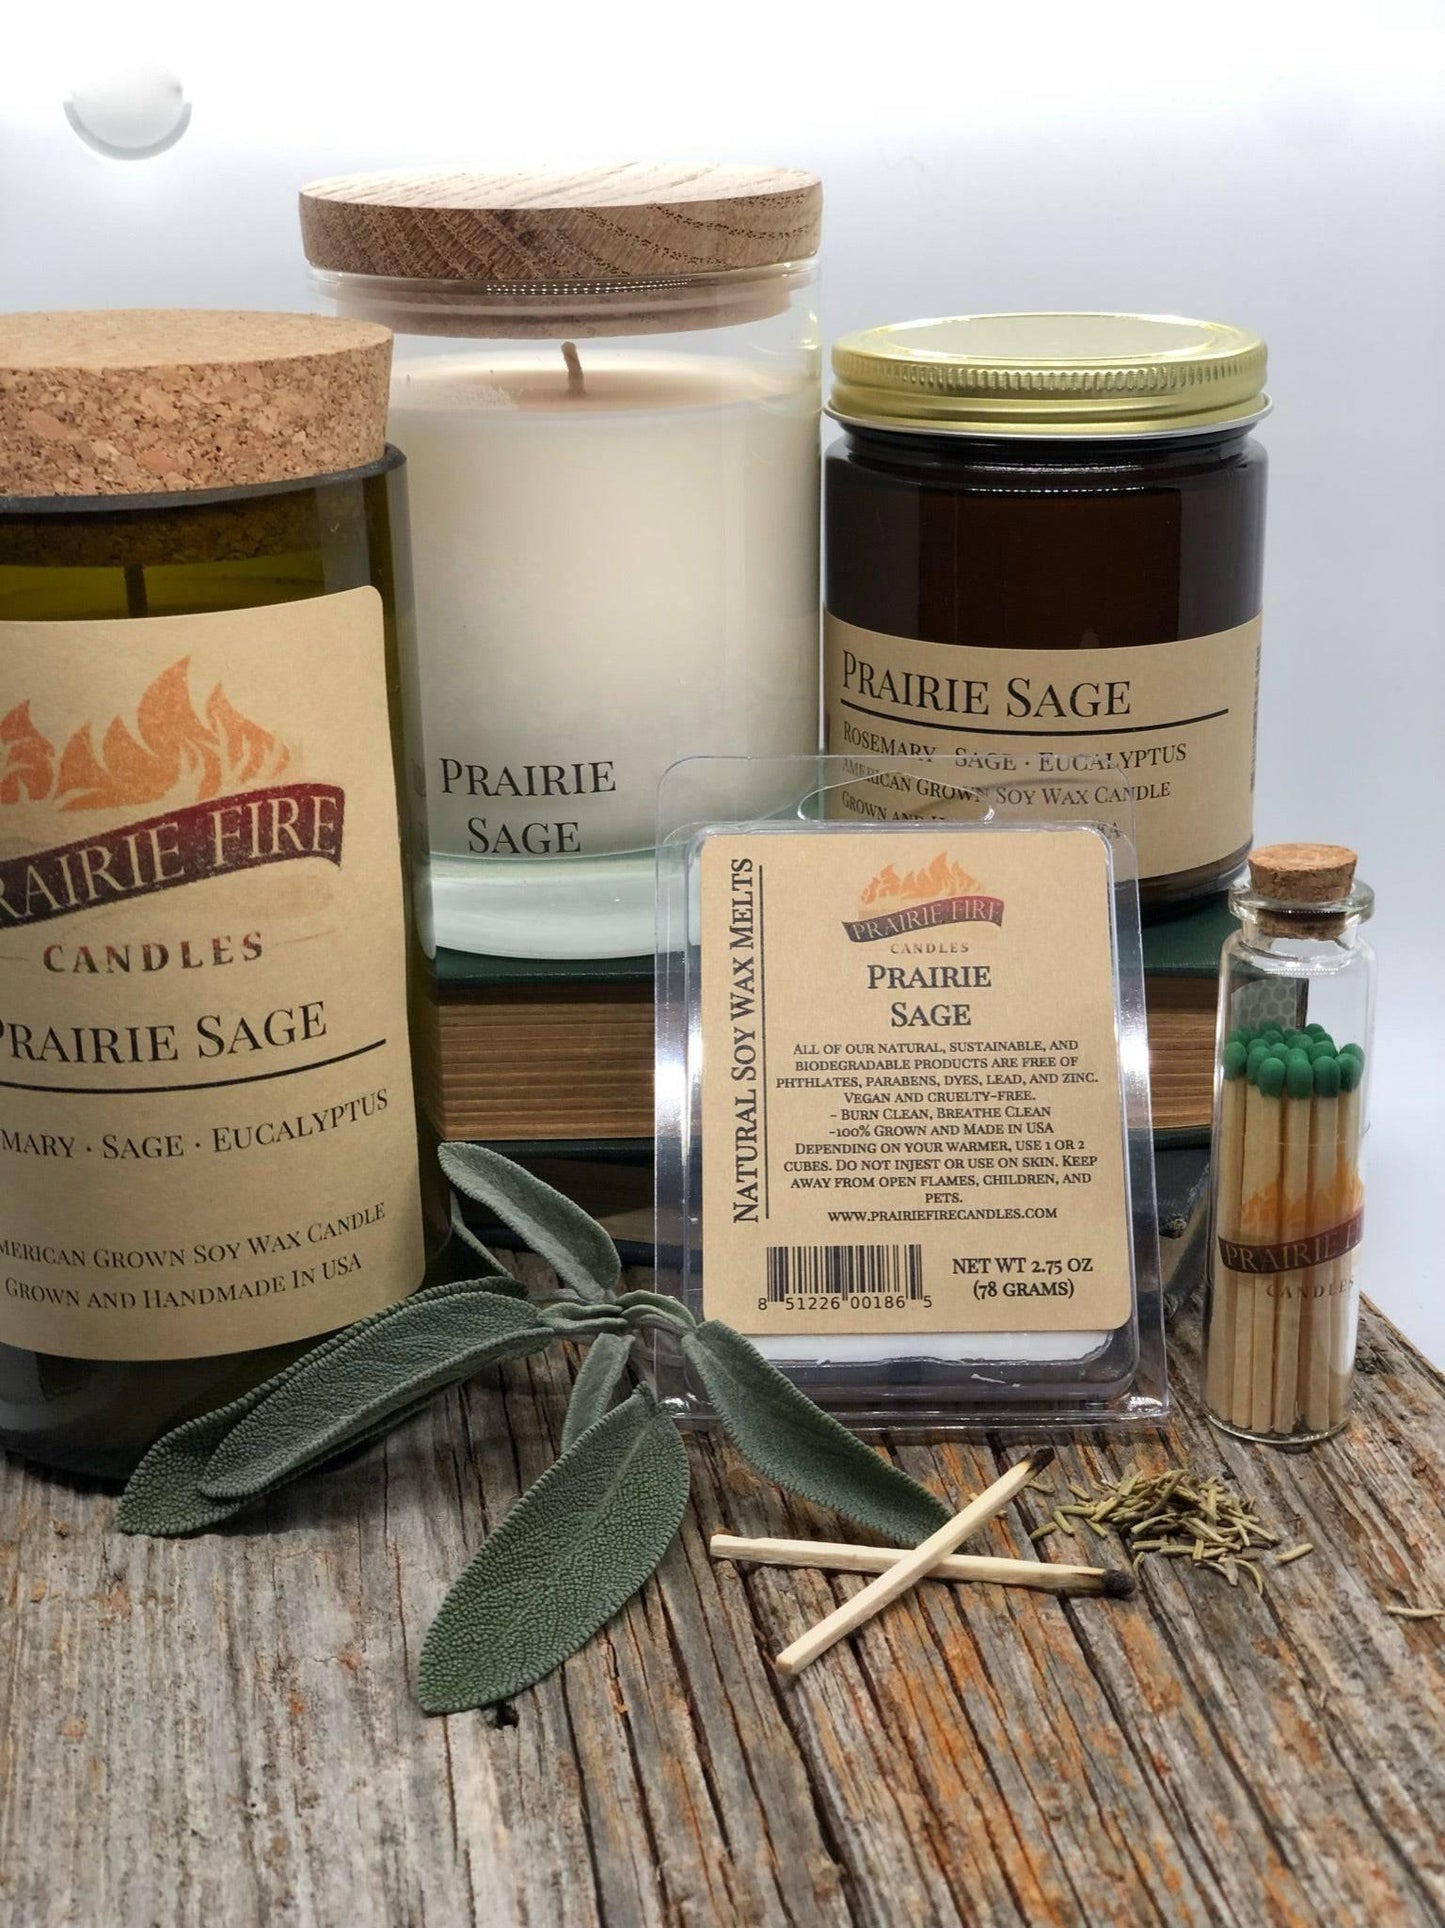 Prairie Sage Soy Wax Candle | Repurposed Wine Bottle Candle Natural Cork | Handmade in USA Candle | Eco-Friendly Candle | Non-Toxic Soy Candle - Prairie Fire Candles